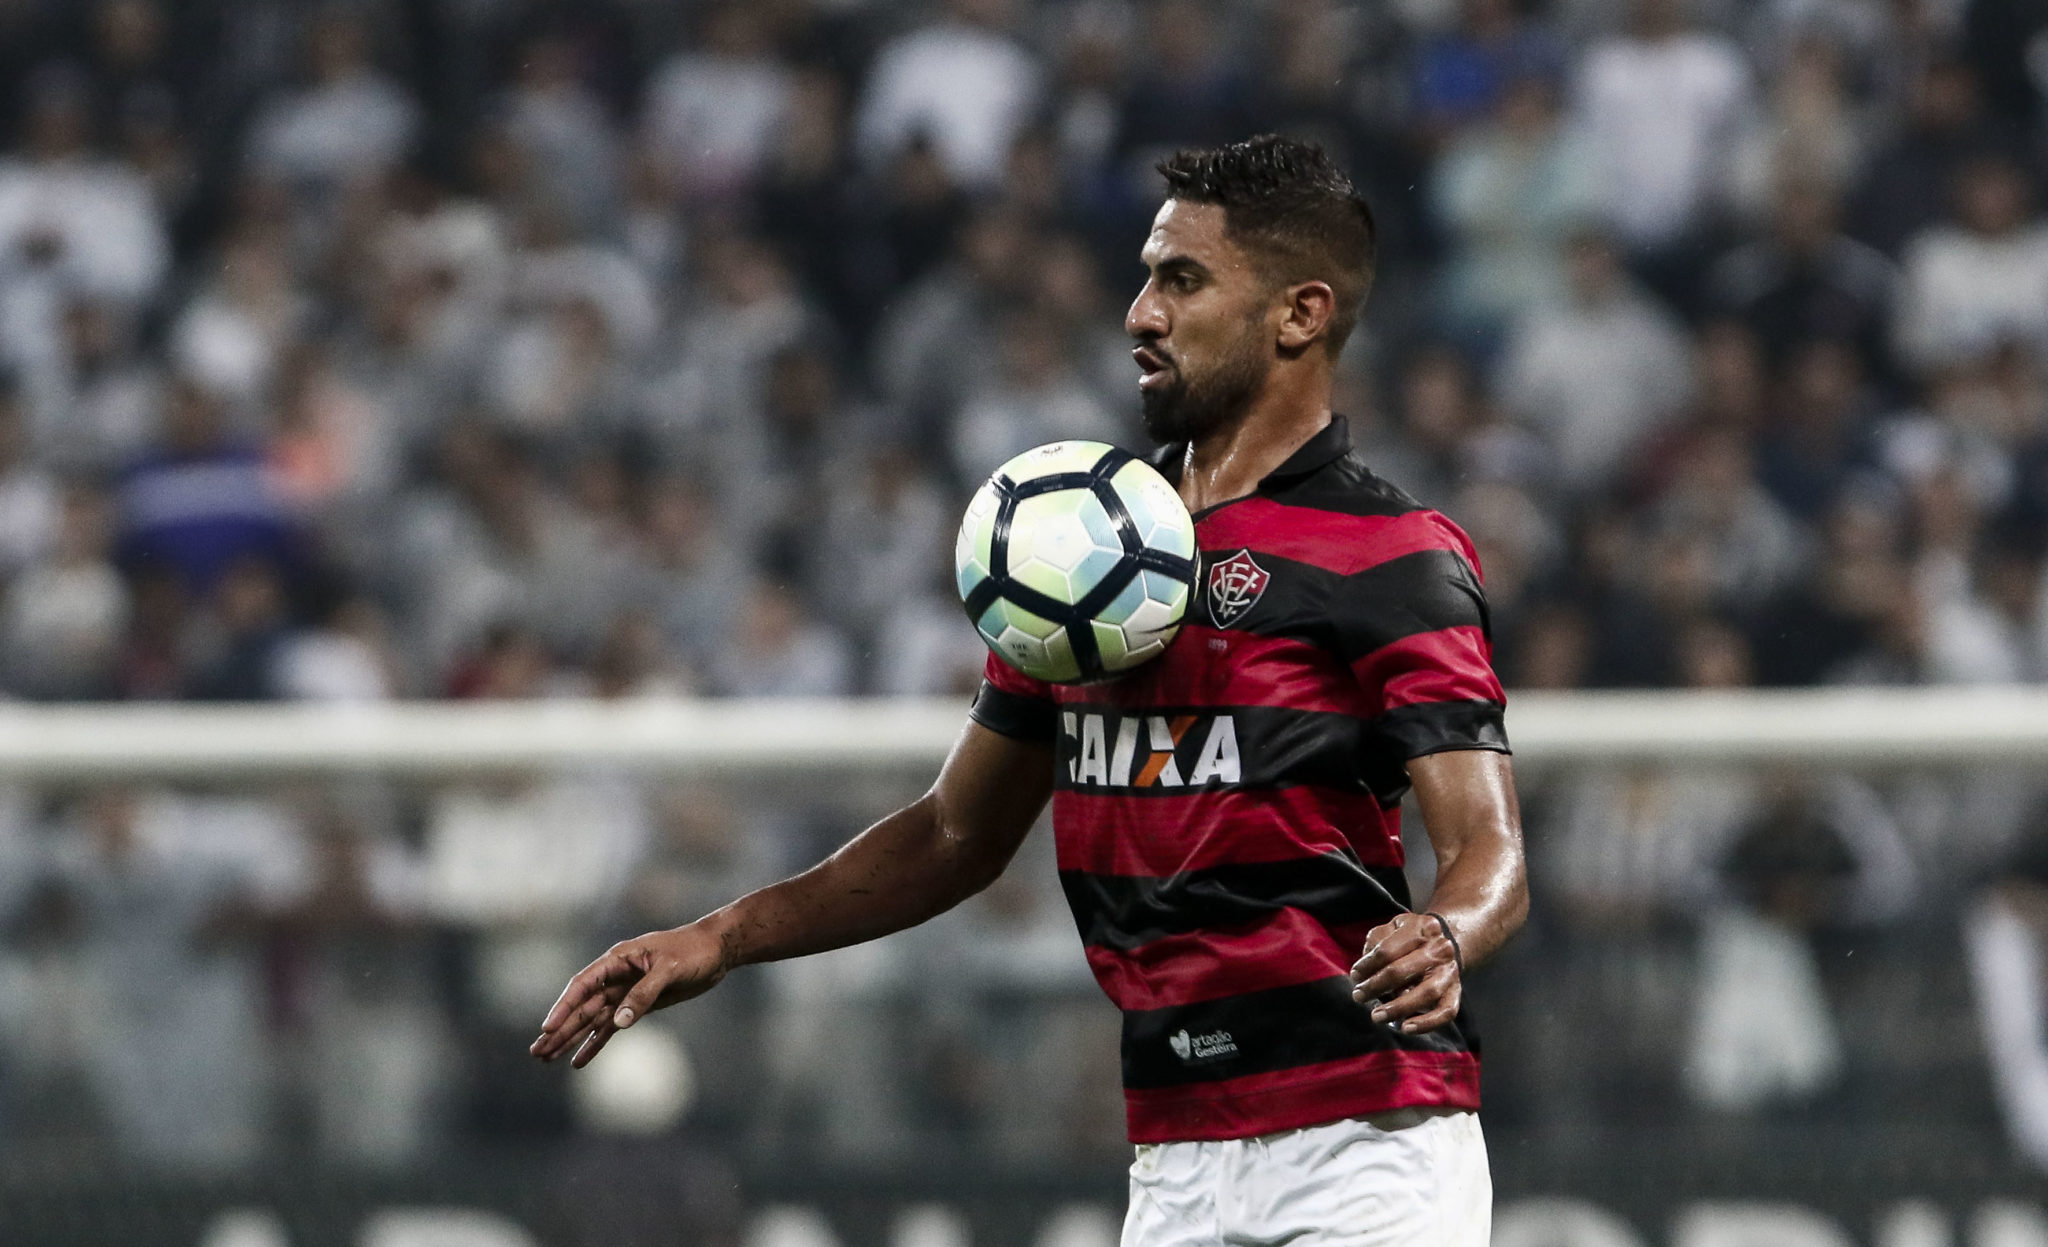 SAO PAULO, BRAZIL - AUGUST 19: Trellez of Vitoria conducts the ball during the match between Corinthians and Vitoria for the Brasileirao Series A 2017 at Arena Corinthians Stadium on August 19, 2017 in Sao Paulo, Brazil. (Photo by Miguel Schincariol/Getty Images)